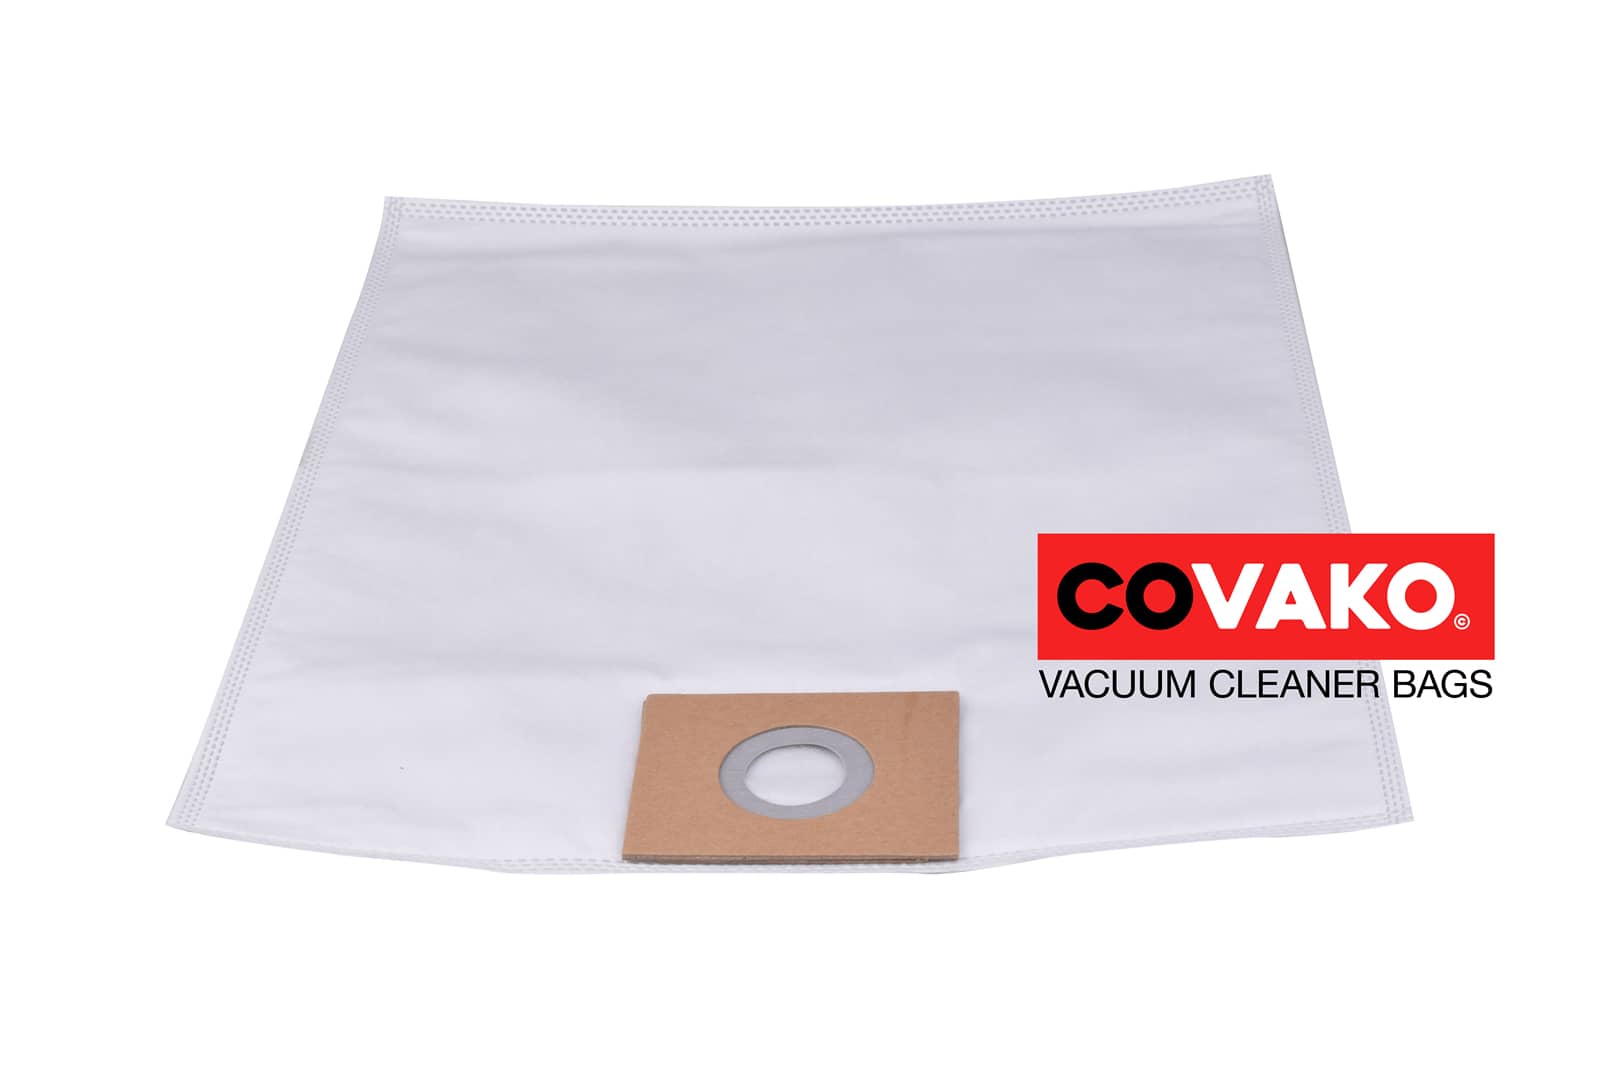 I-vac Dryver 10R / Synthesis - I-vac vacuum cleaner bags